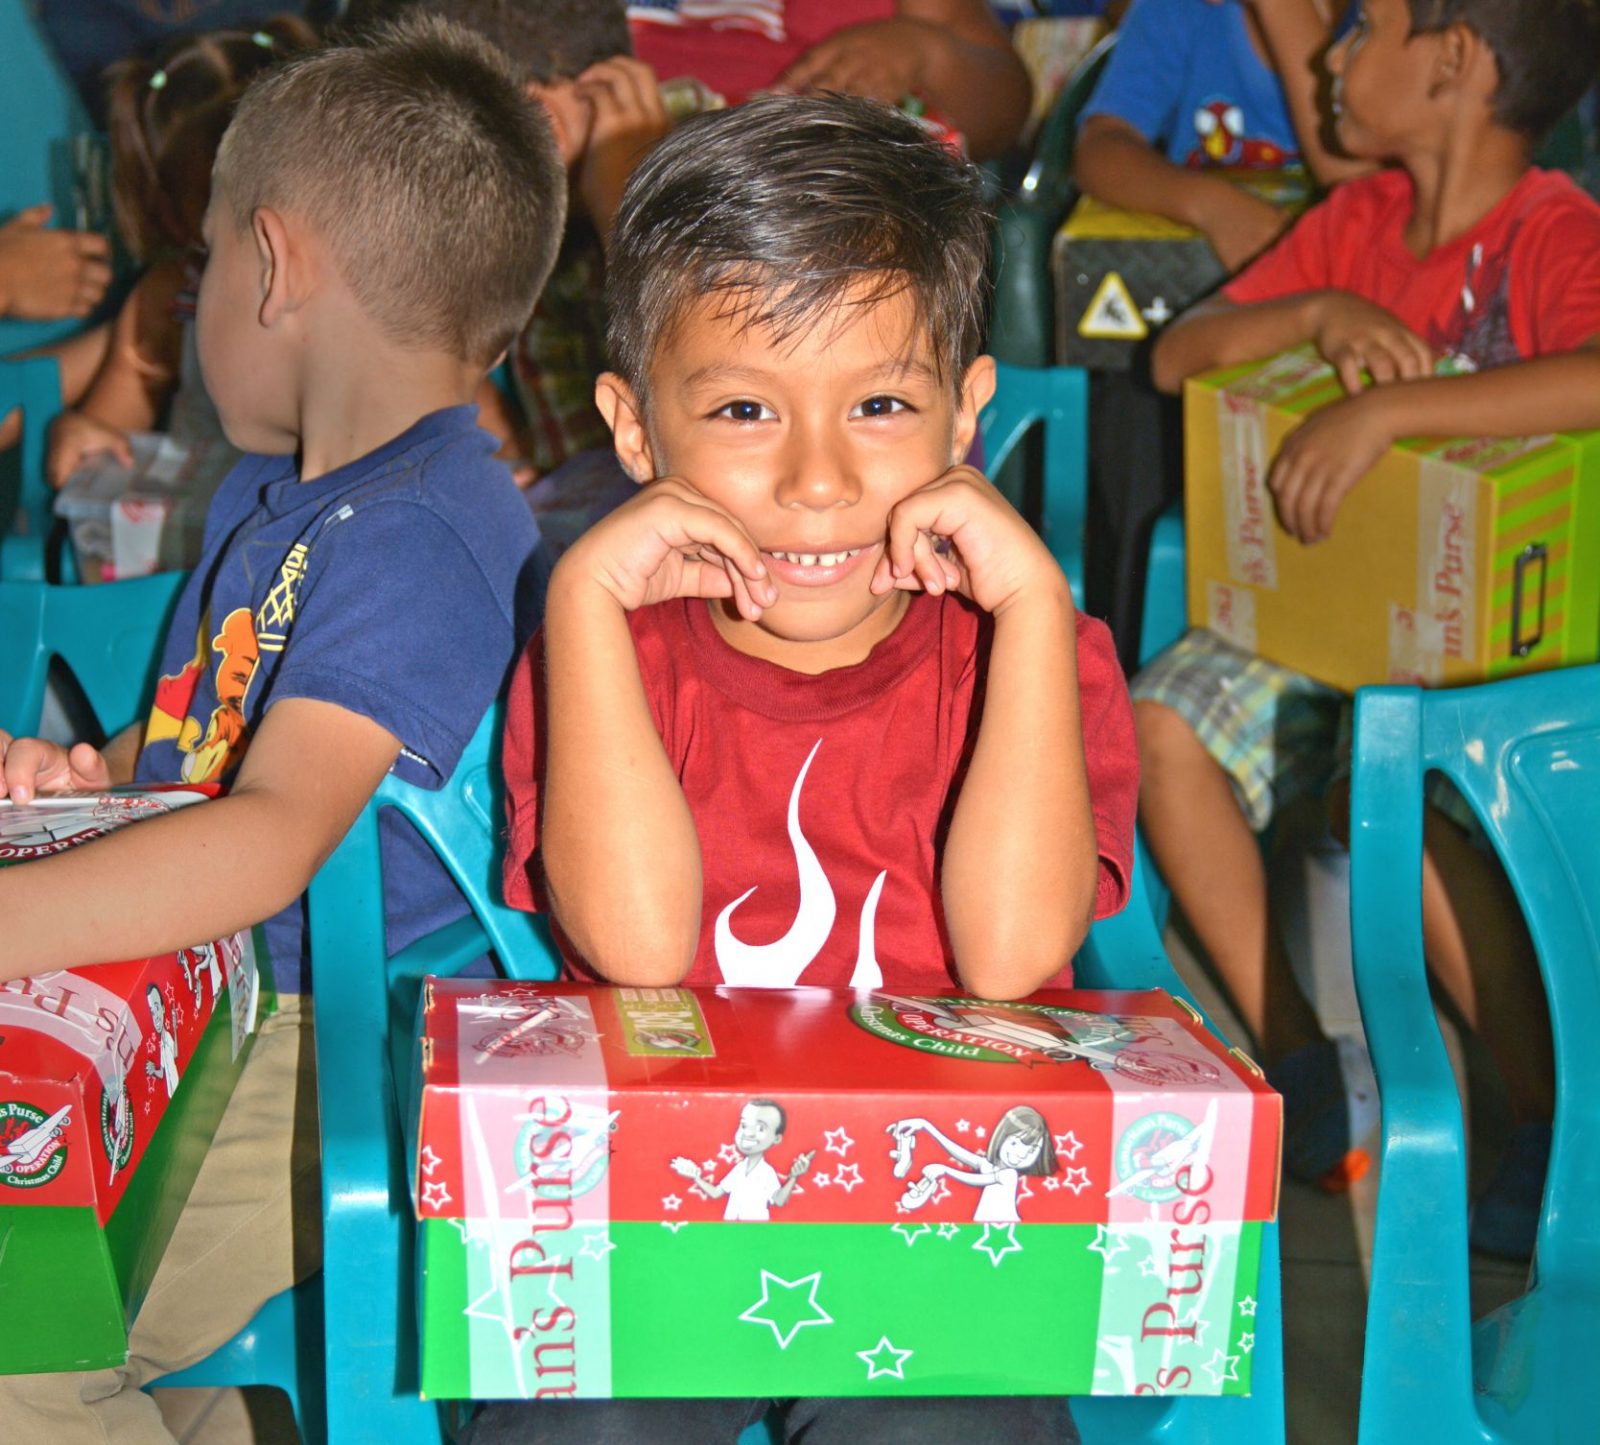 Cornwall contributed 748 Christmas shoeboxes for children in need